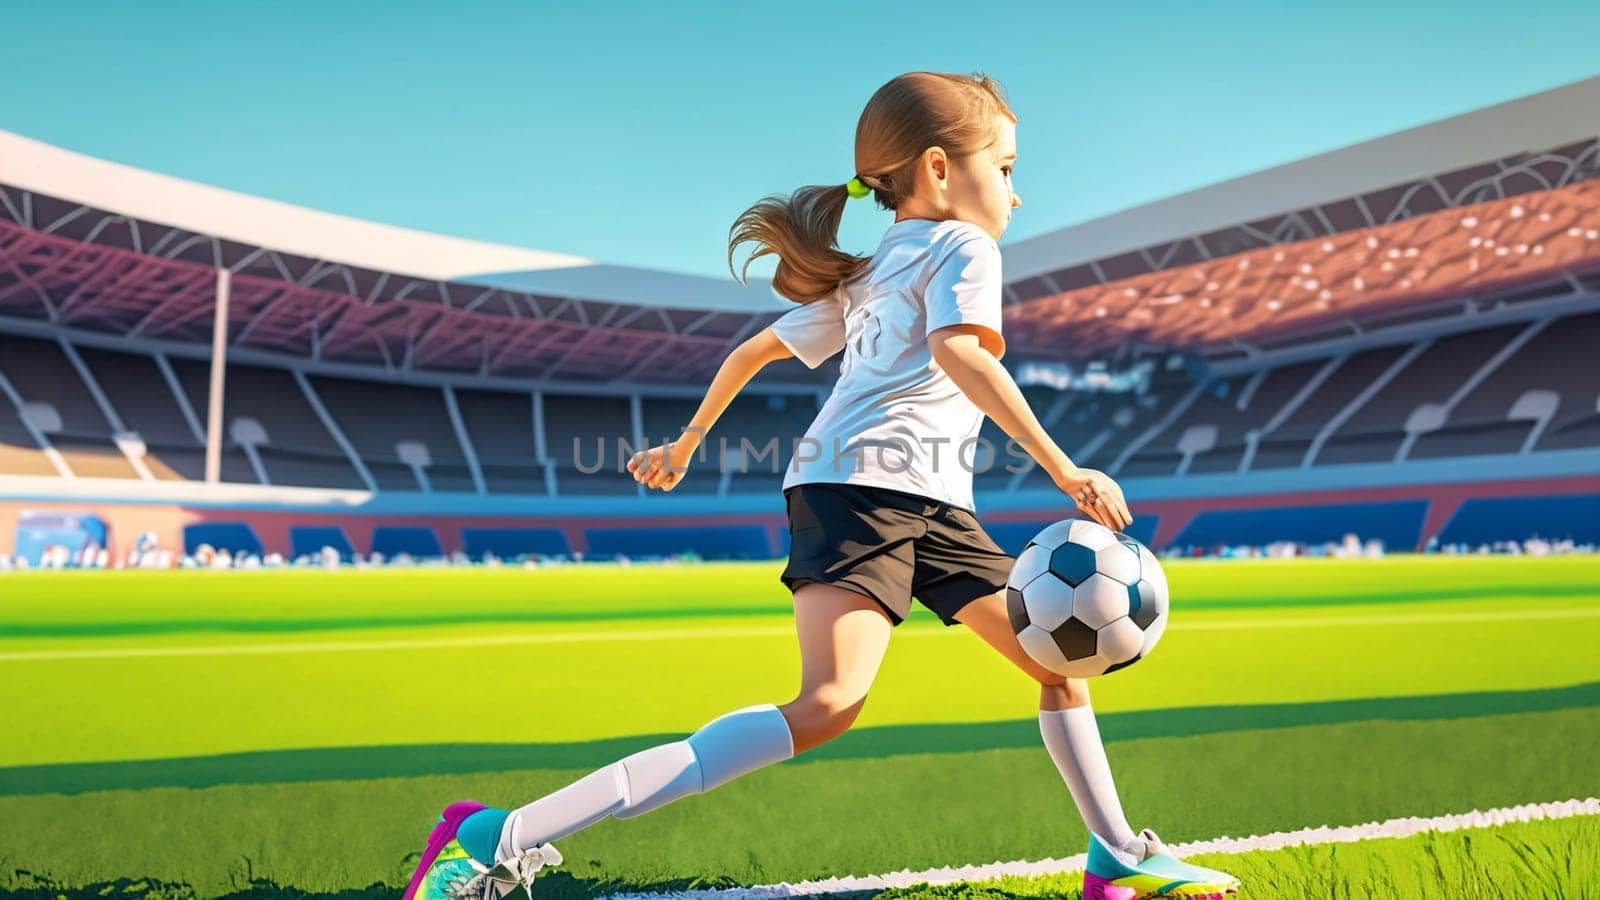 A young girl football player in colors of national germany football team plays with her feet a soccer ball. illustrations in cartoon style on sport stadium background for children High quality illustration